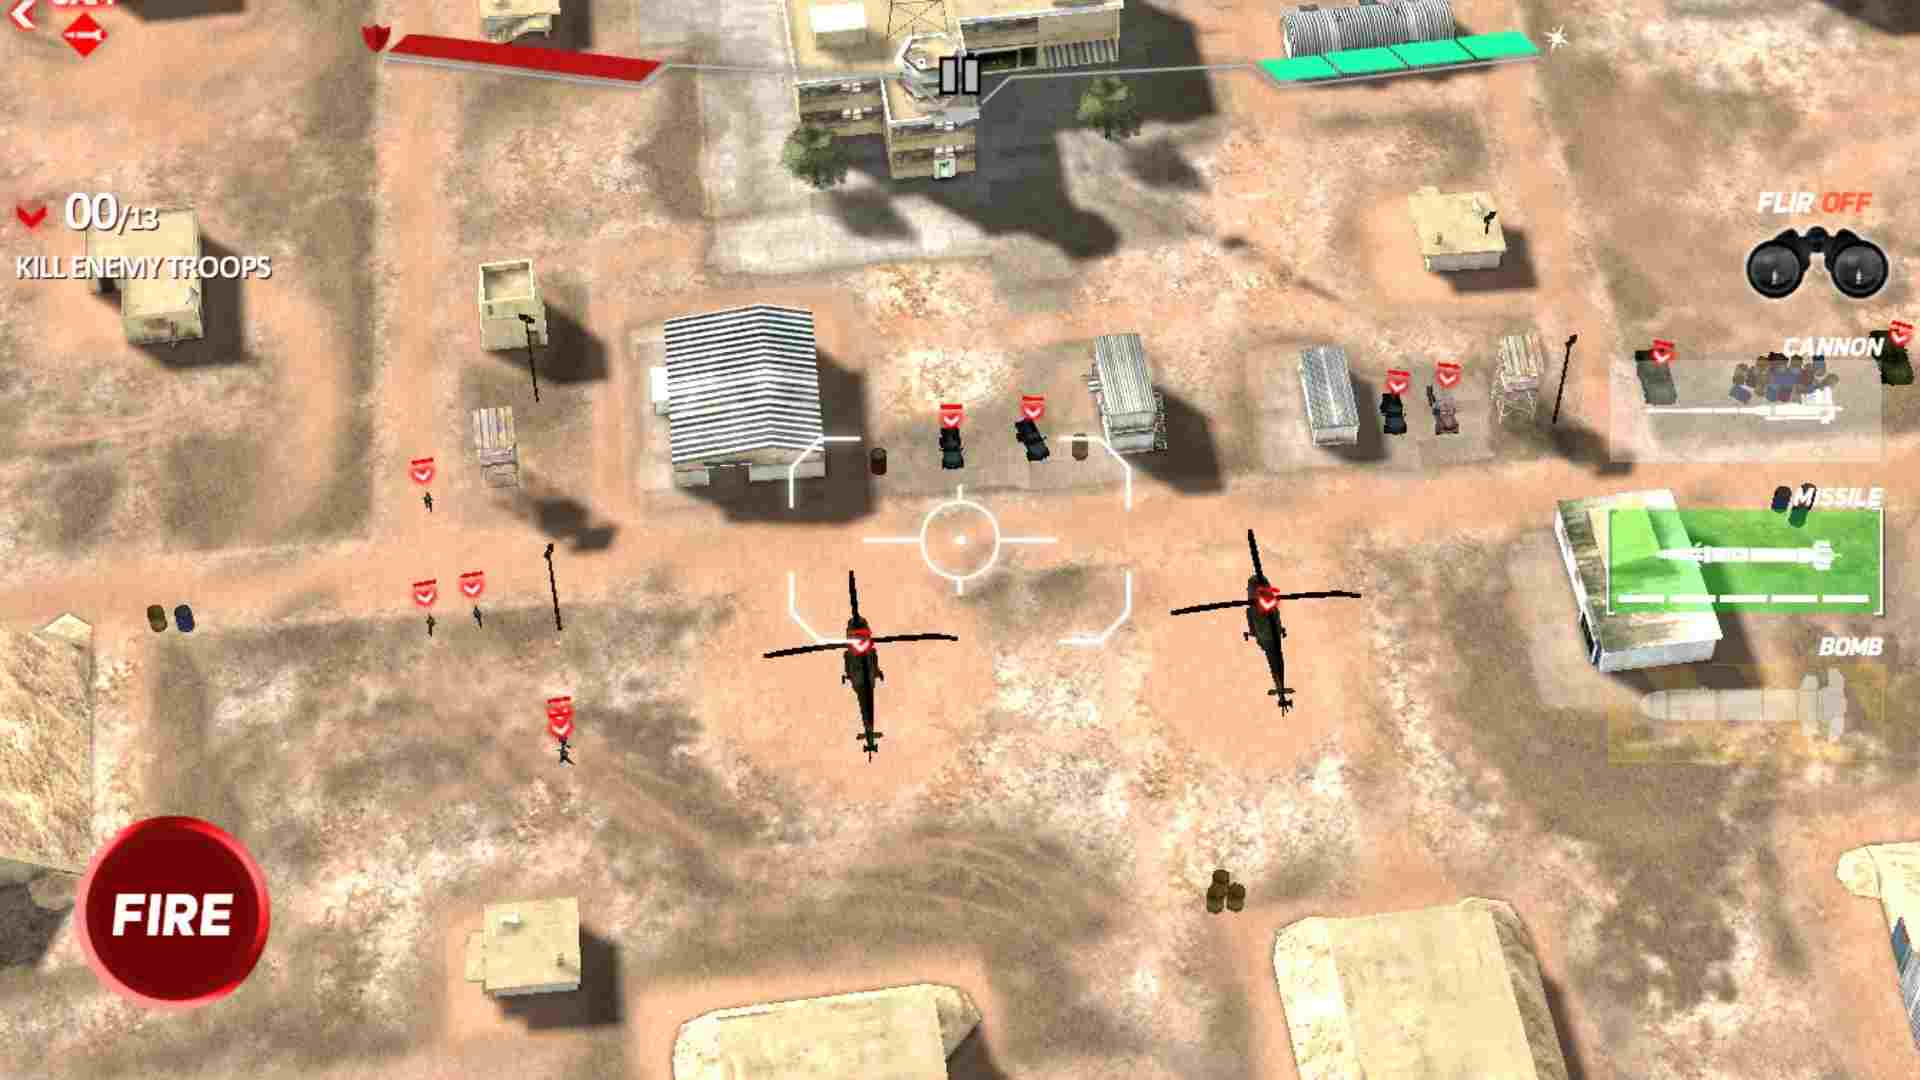 Download Drone 2 Free Assault Mod